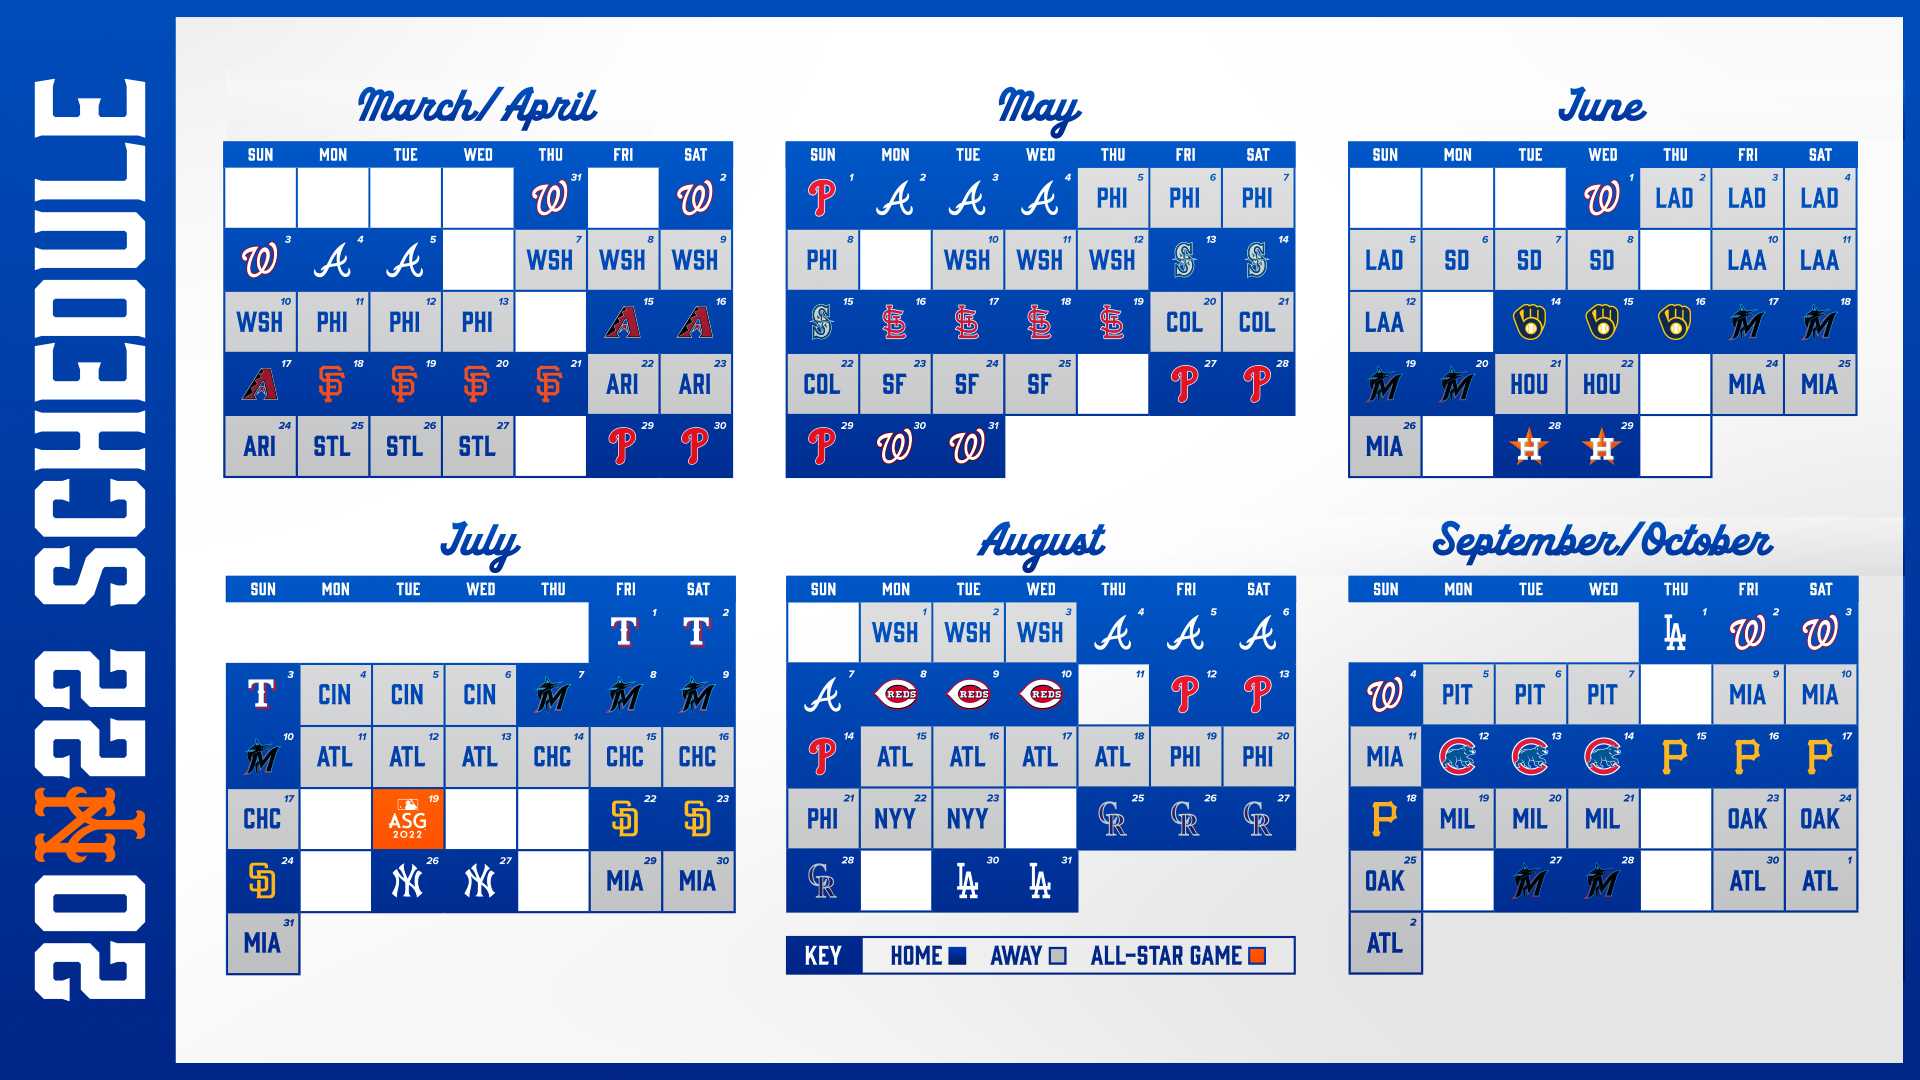 Mets 2022 Schedule New York Mets On Twitter: "Our 2️⃣0️⃣2️⃣2️⃣ Schedule Is Highlighted By Some  Big Home Games. 👀 Https://T.co/Fedpjl44Uu" / Twitter